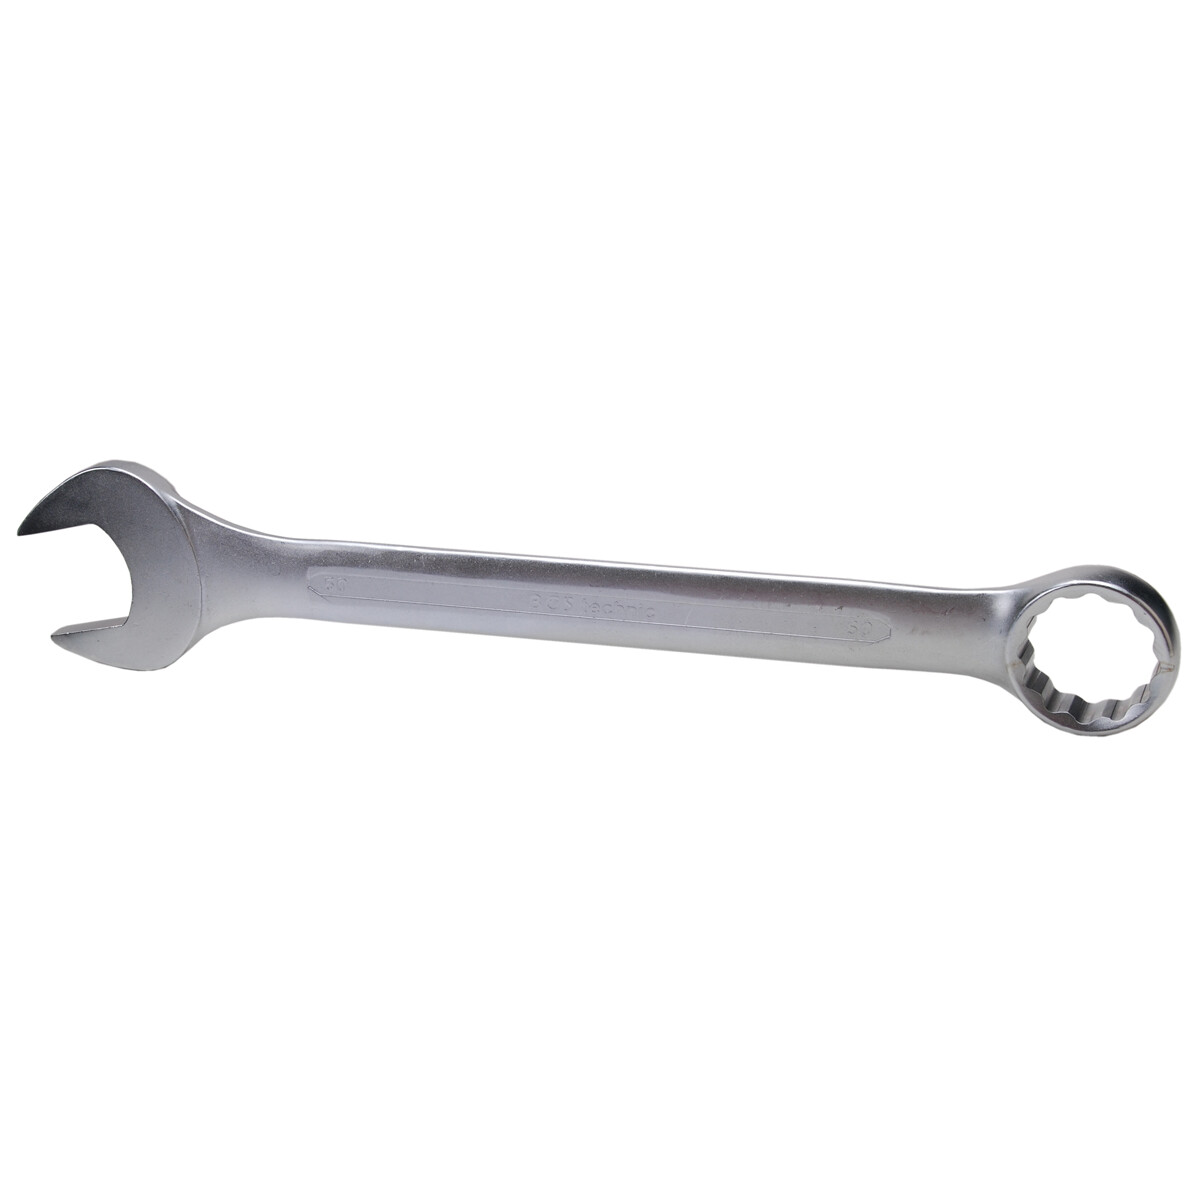 BGS Combination Spanner | 50 mm (BGS 1100)